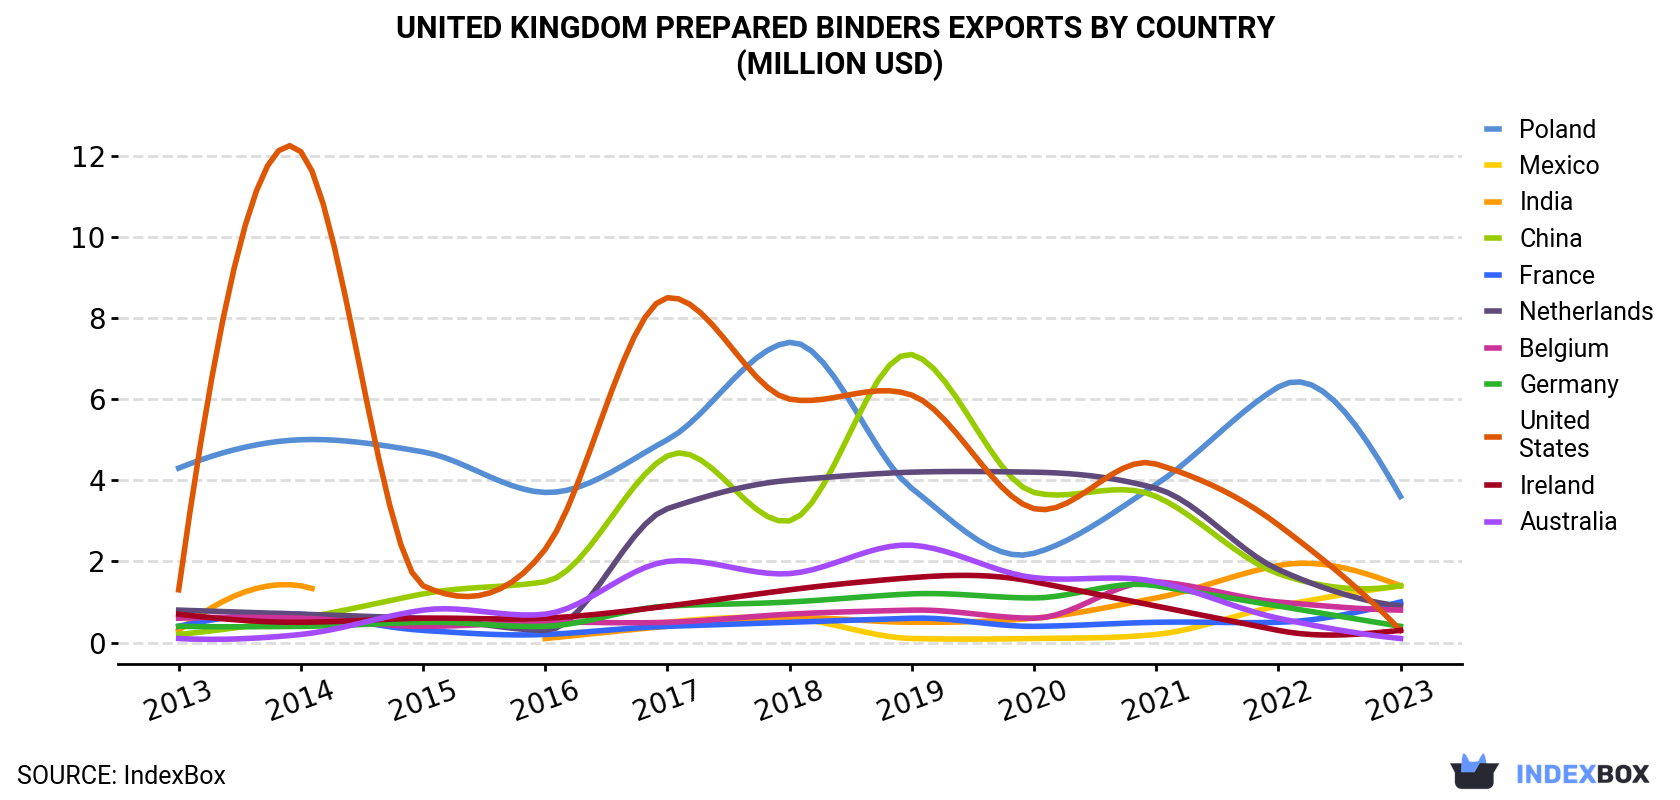 United Kingdom Prepared Binders Exports By Country (Million USD)